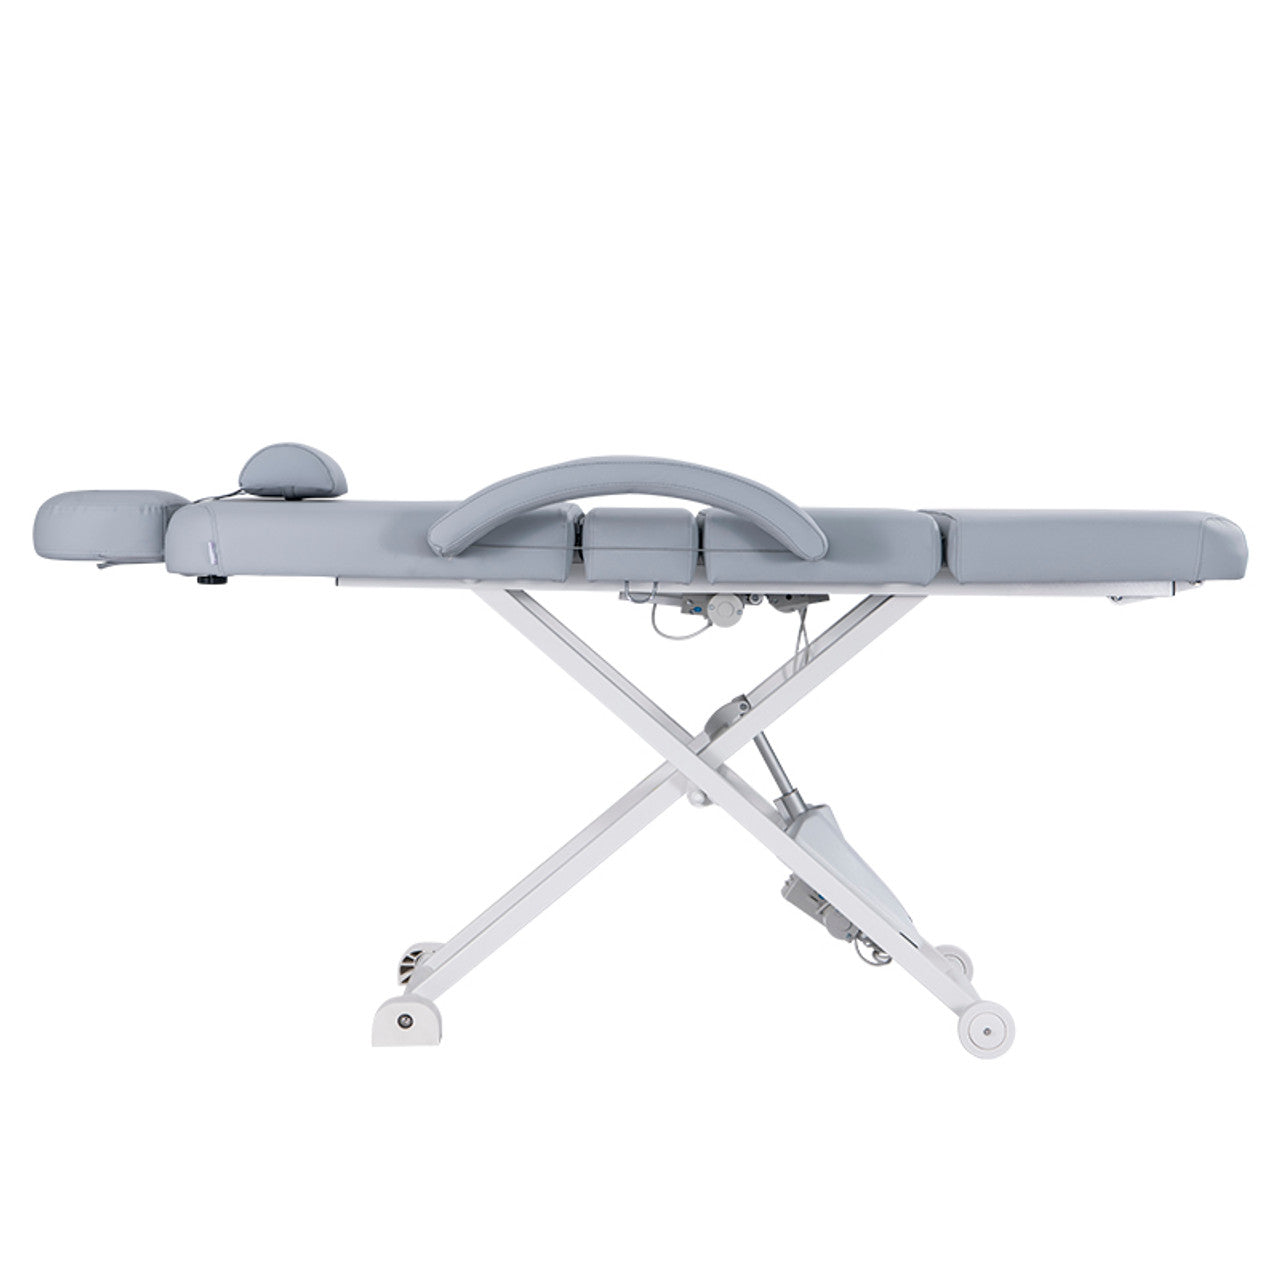 SpaMarc . Cagney . 3 Motor Massage Table . ADA Compliant (STB)